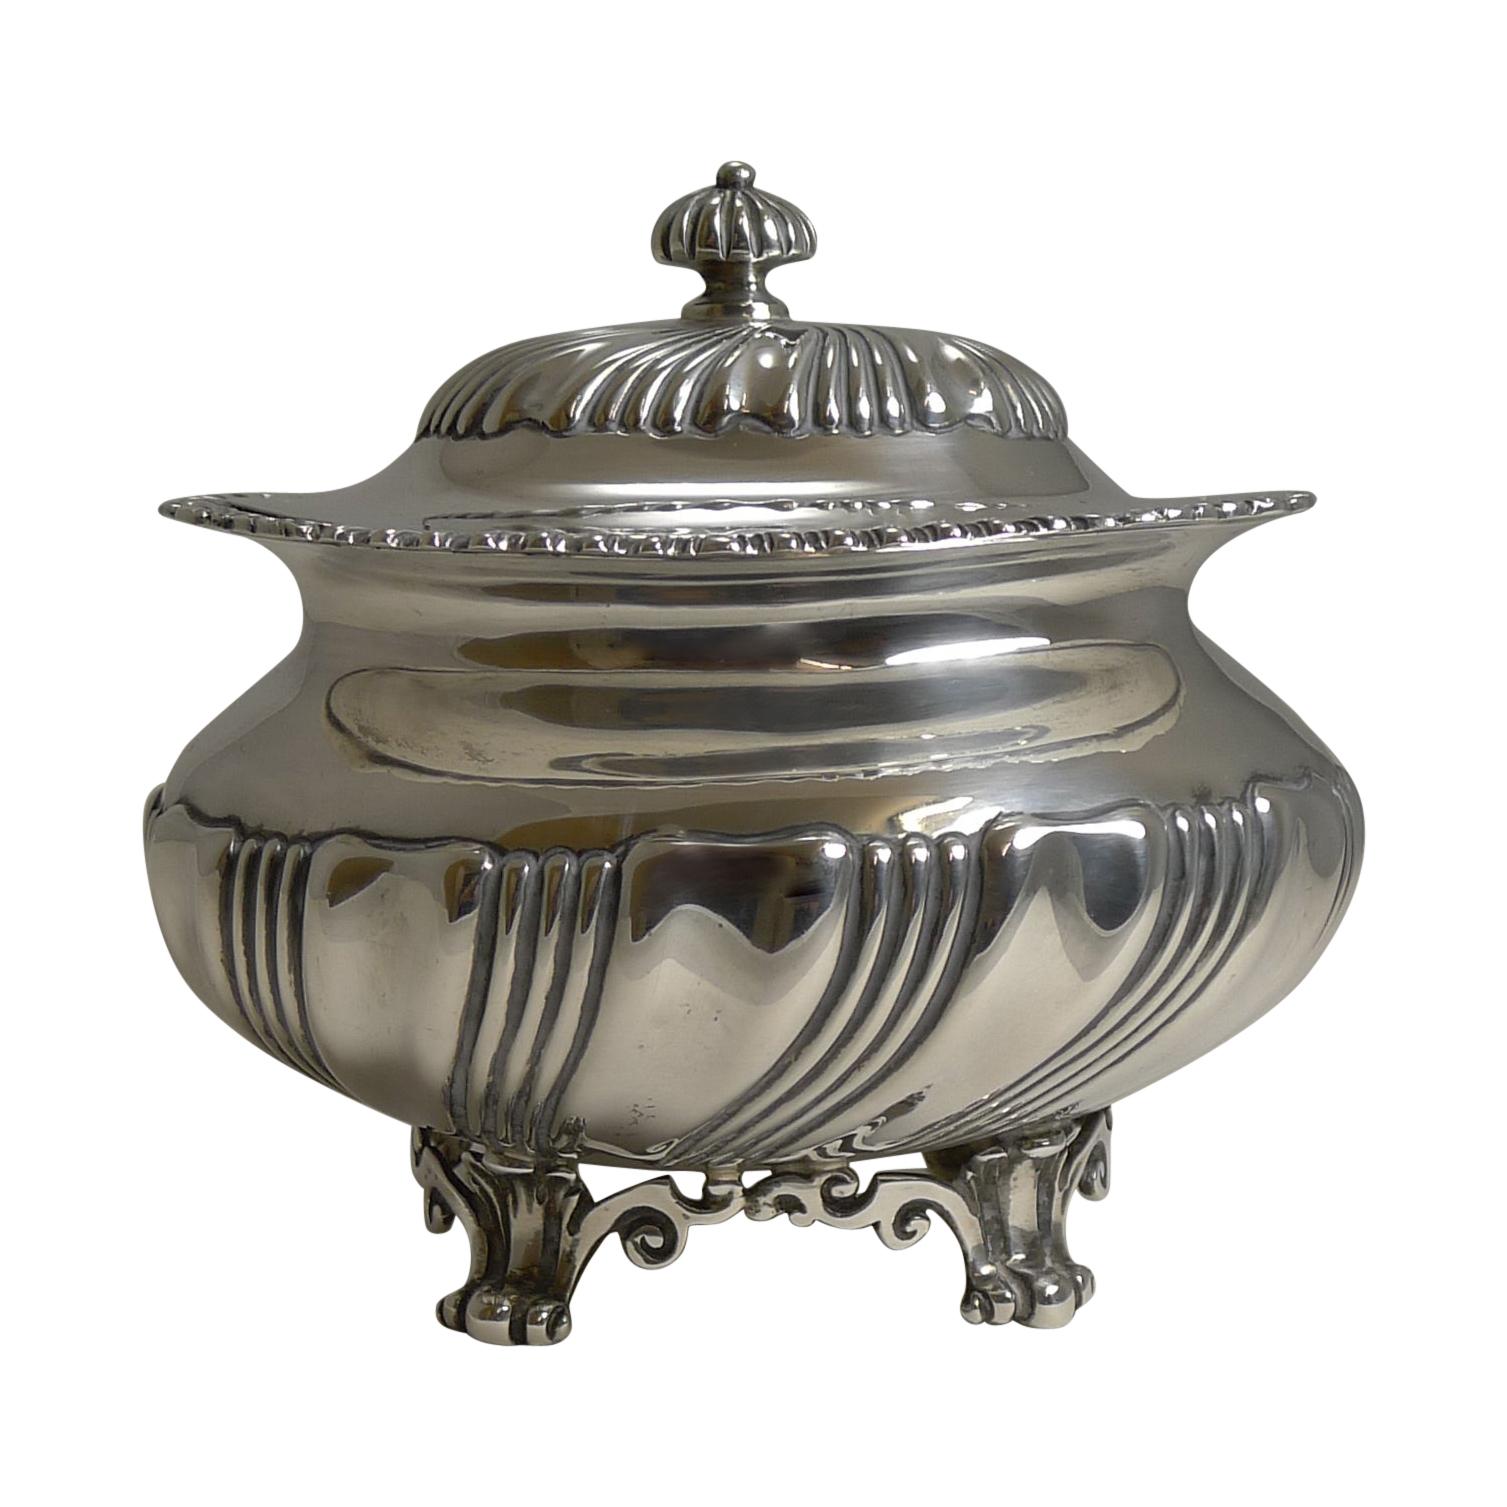 Antique English Sterling Silver Tea Caddy, London, 1909